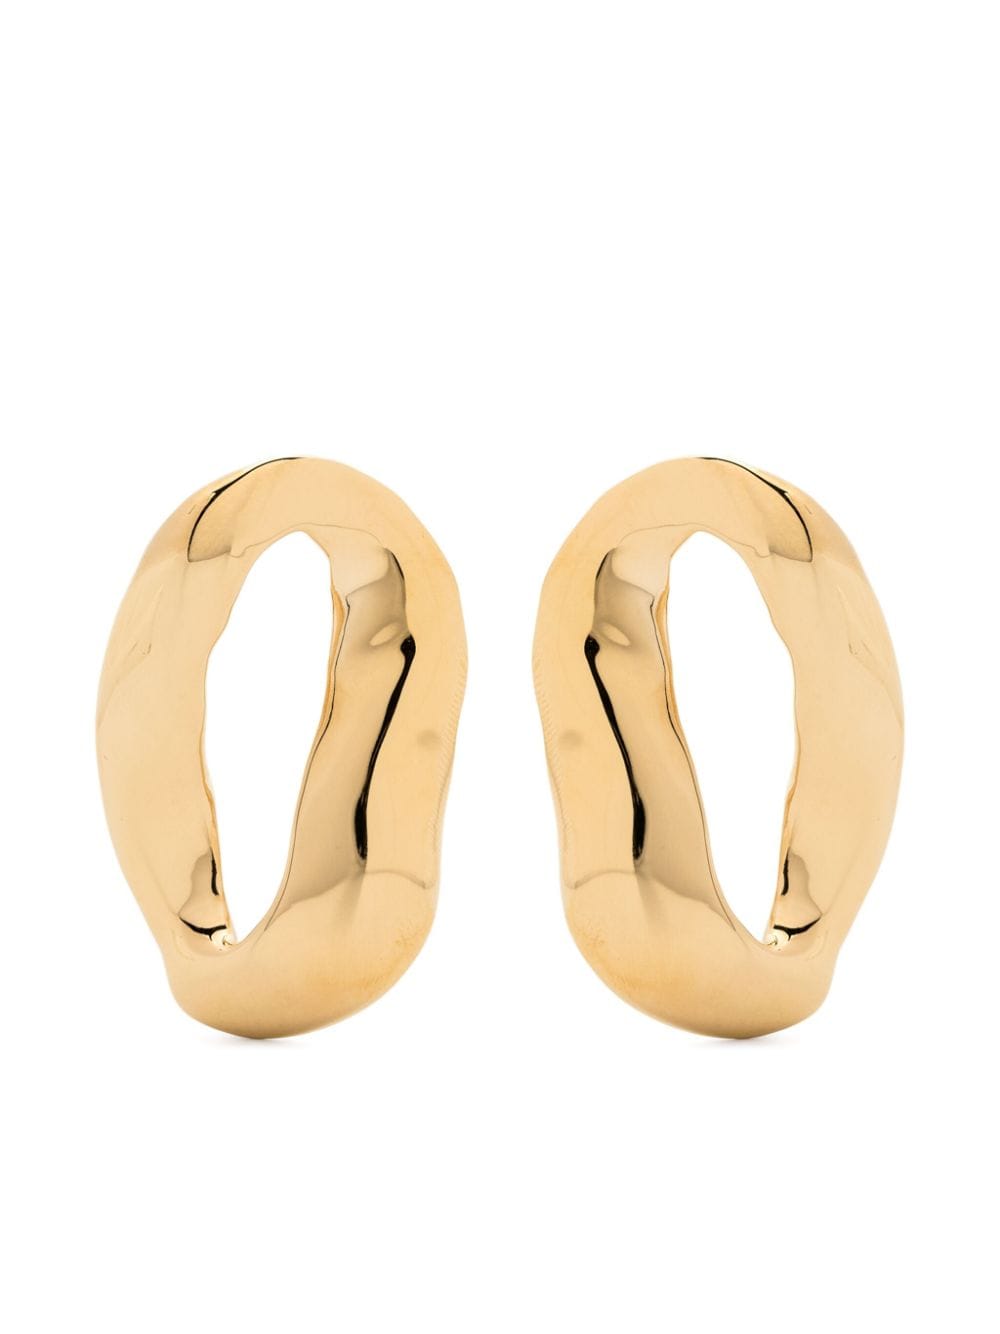 Marni Gold-plated Sculpted Earrings